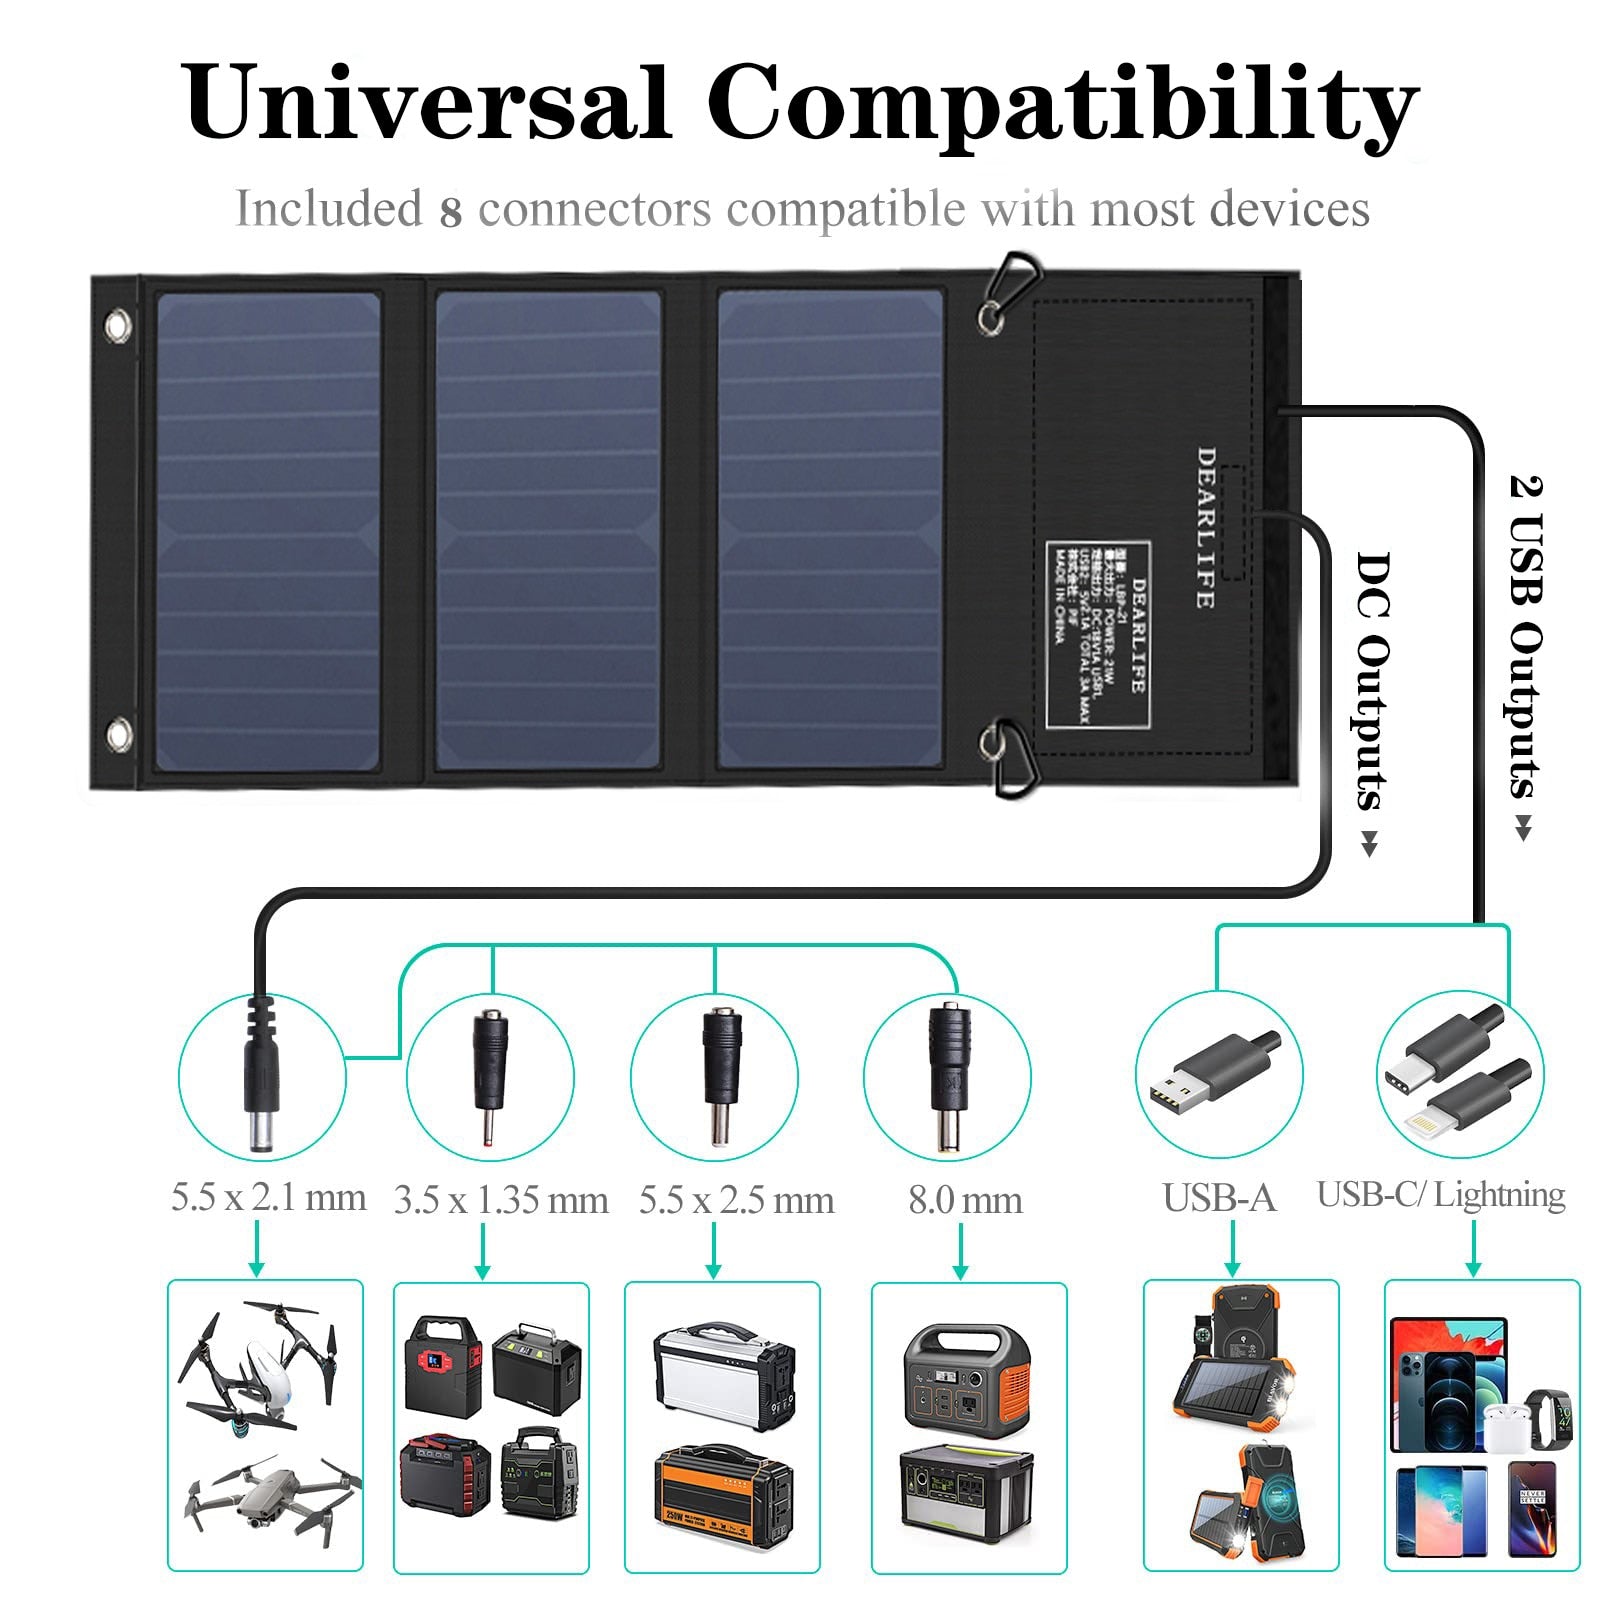 Universal Compatibility Included 8 connectors compatible with most devices 1